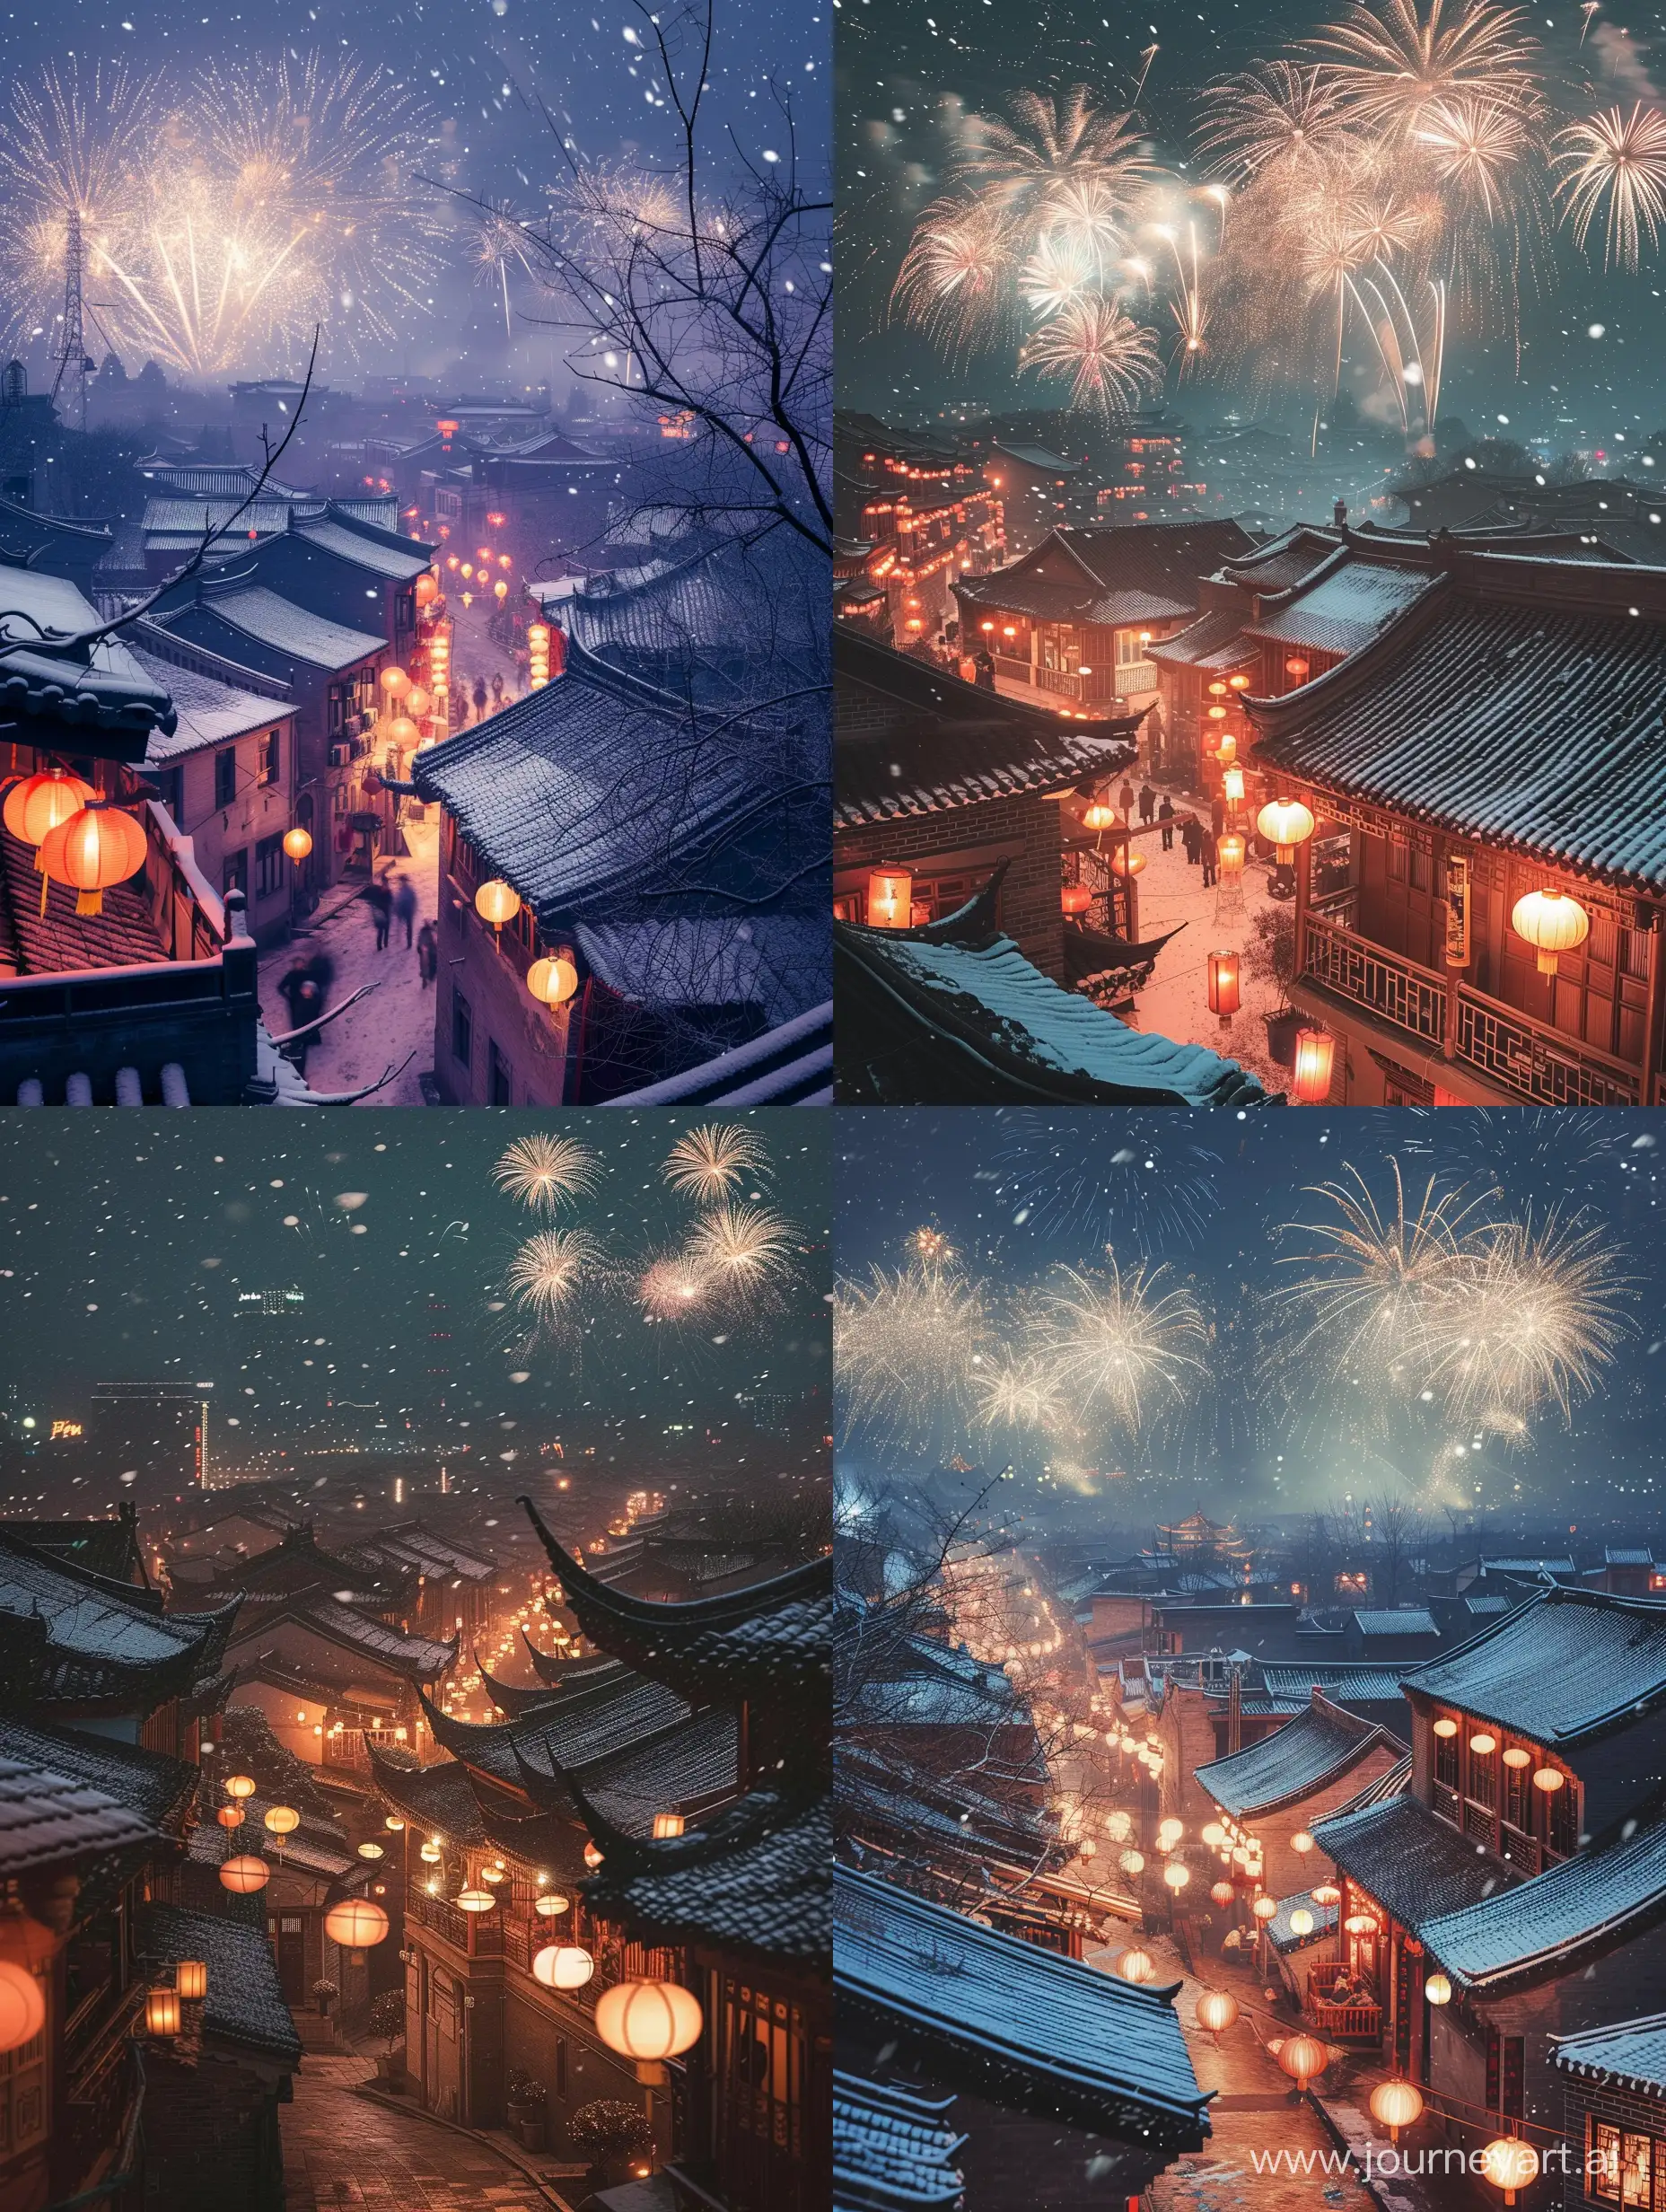 Chinese New Year, at night, streets adorned with lanterns, rooftops dusted with a bit of snow, fireworks lighting up the sky, creating a festive atmosphere; depth of field effect, capturing the real world, a masterpiece of photography."